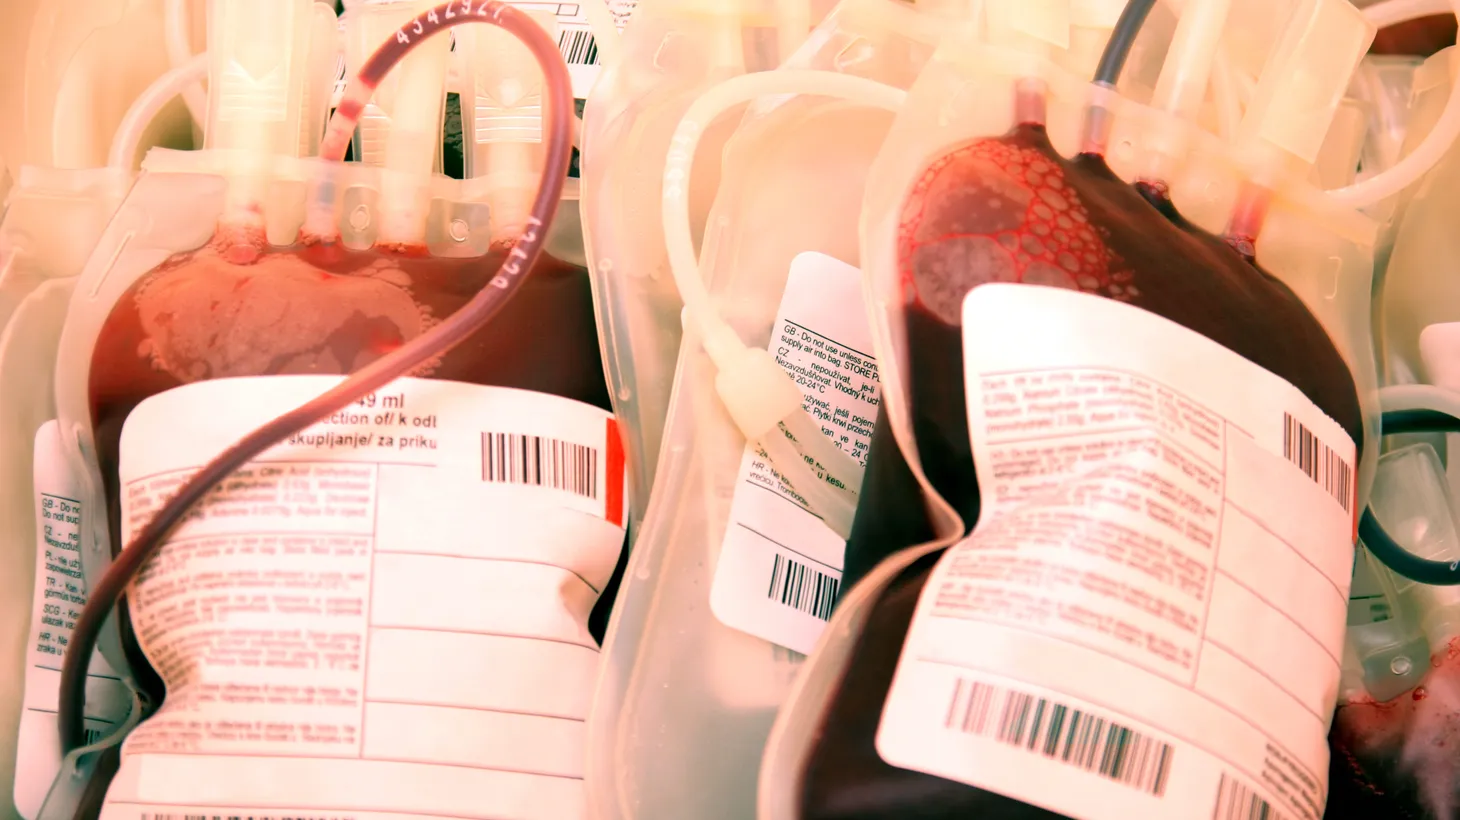 Hospitals typically have three days' worth of blood supplies, but now, some facilities have less than a single day’s supply, says reporter Soumya Karlamangla.